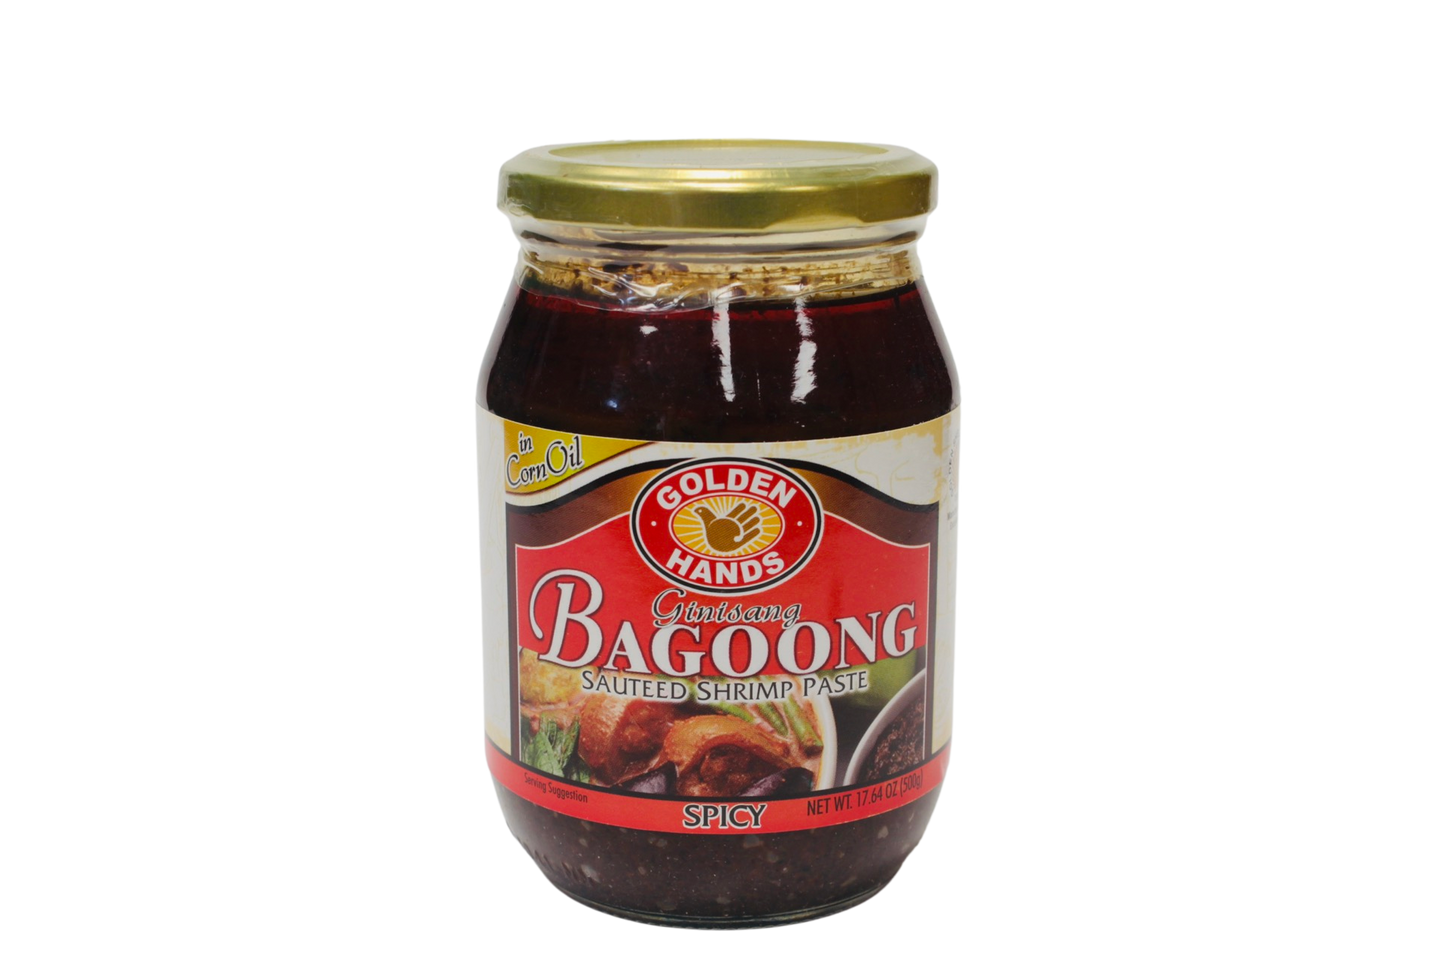 Golden Hands Ginisang Bagoong Sauteed Shrimp Paste Spicy in Corn Oil 500g